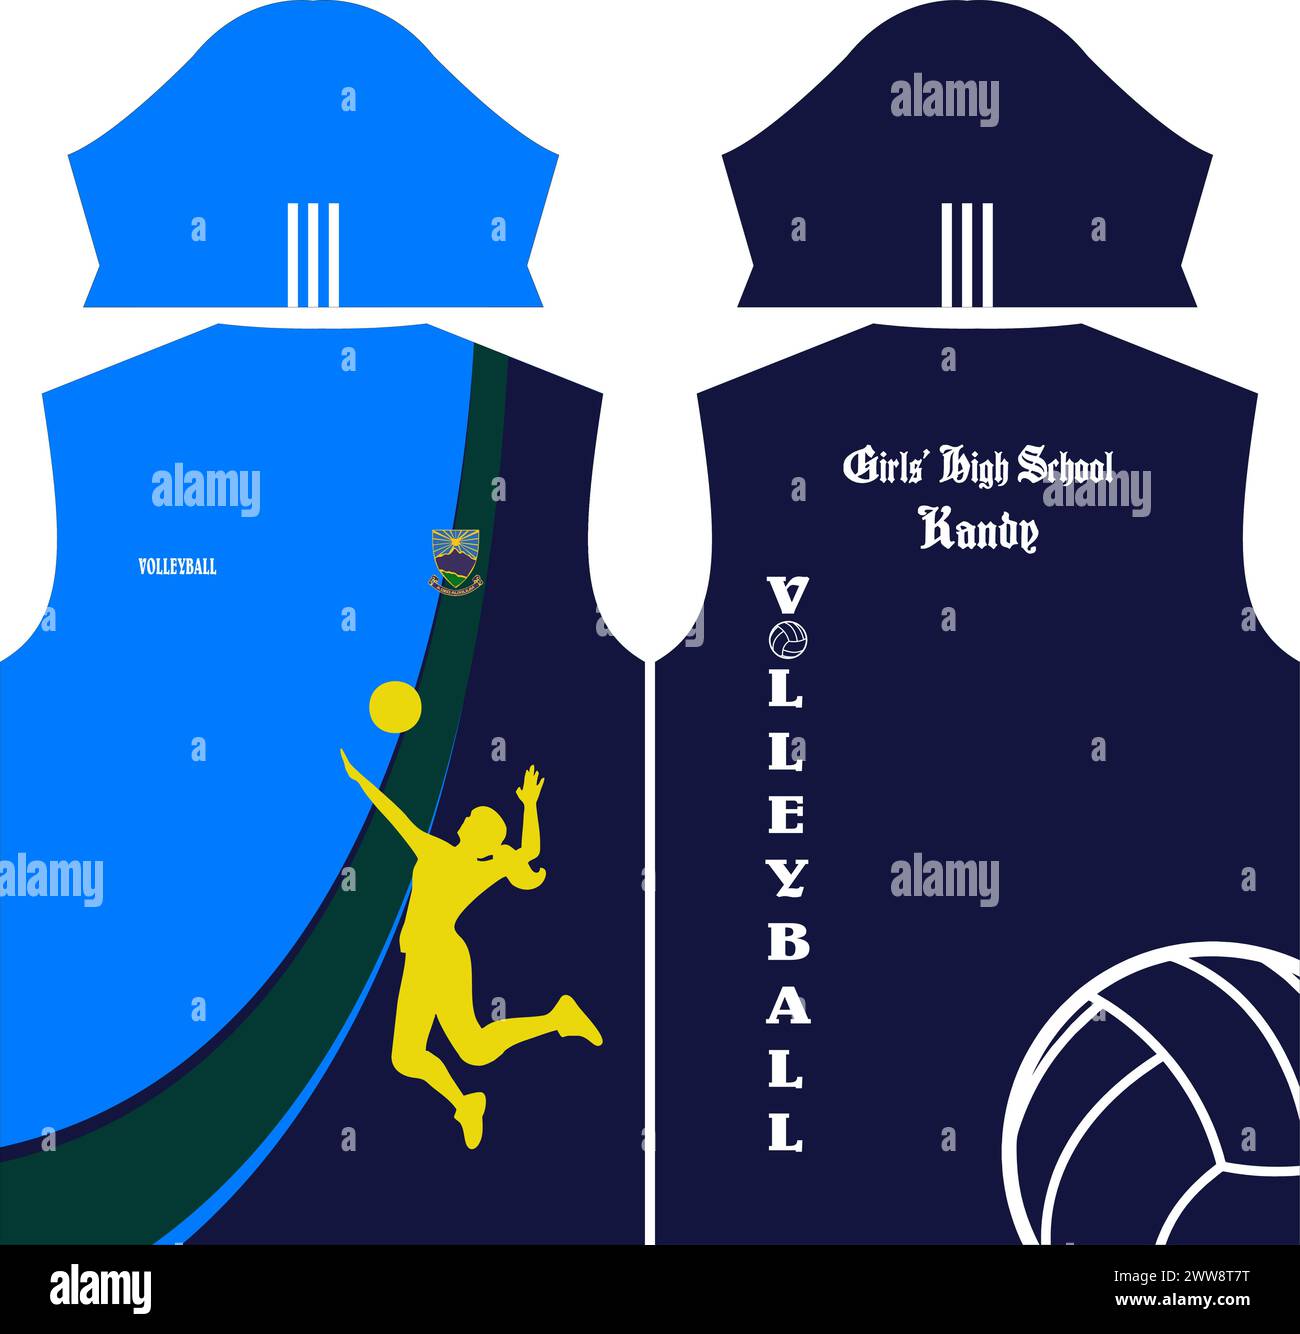 volleyball jersey sublimation sport tshirt design Stock Vector